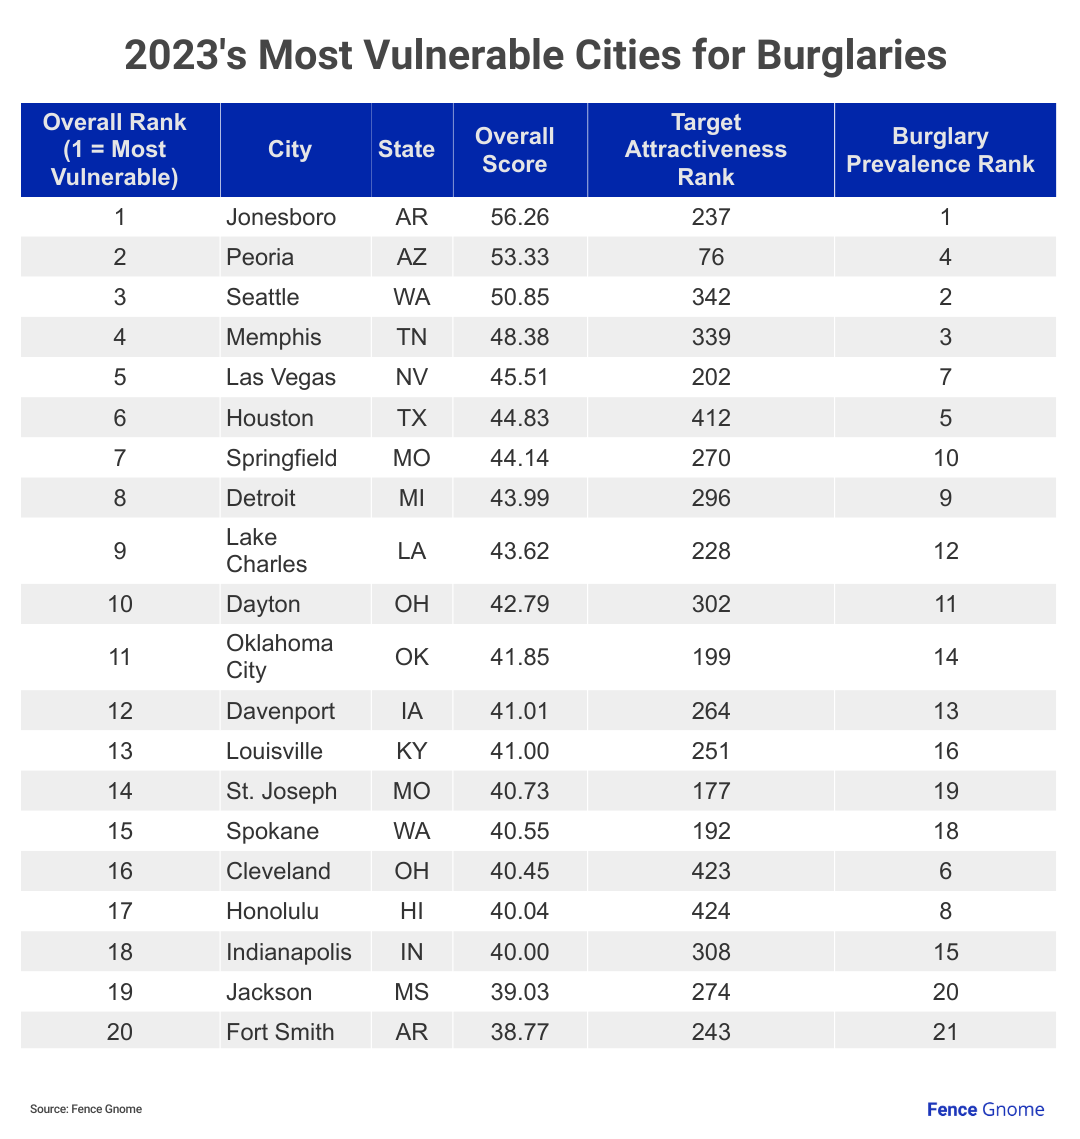 A chart showing 2023's Most Vulnerable Cities for Burglaries